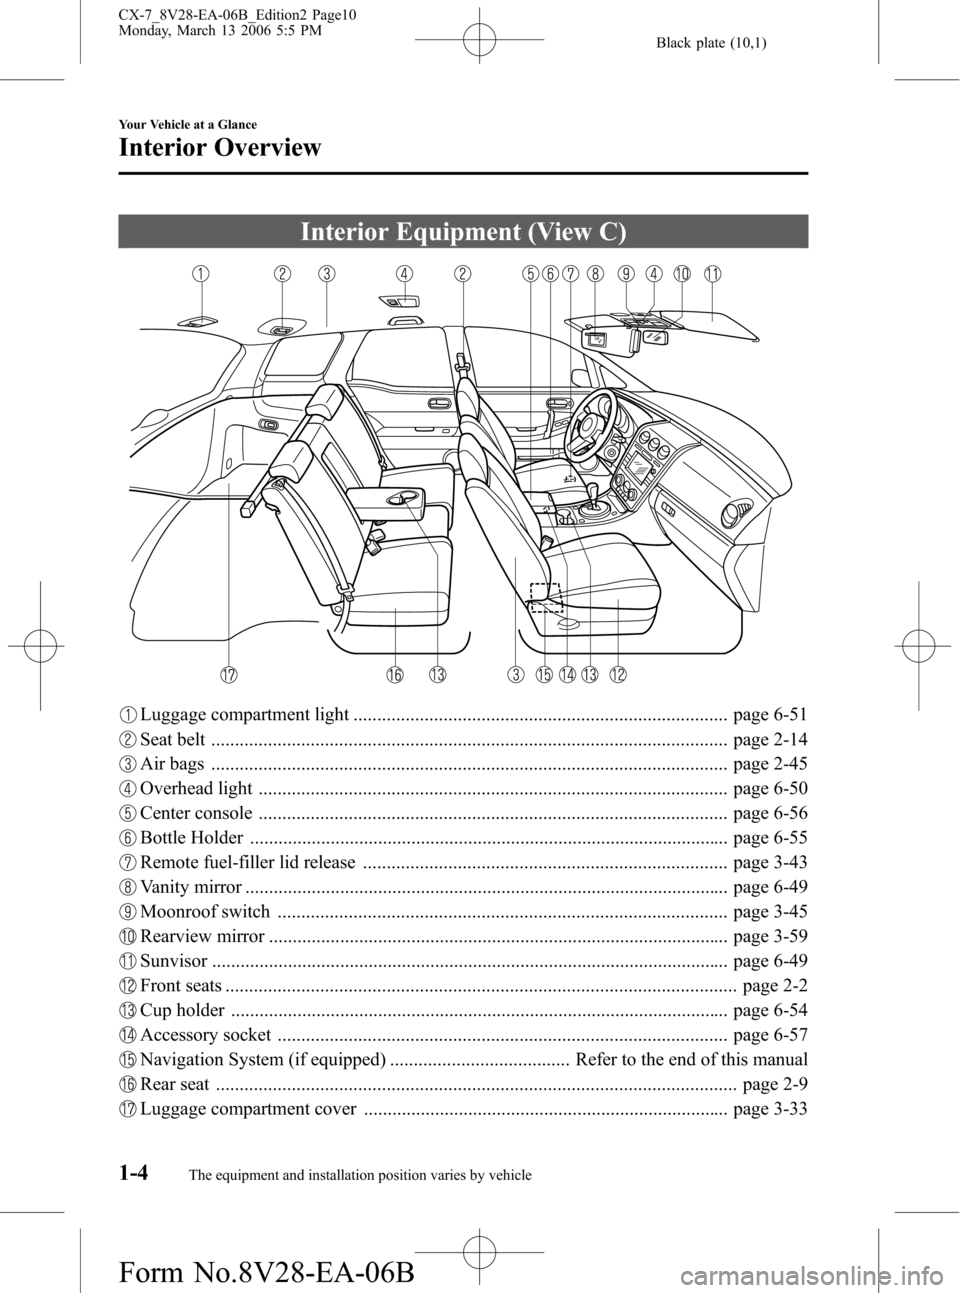 MAZDA MODEL CX-7 2007  Owners Manual (in English) Black plate (10,1)
Interior Equipment (View C)
Luggage compartment light ............................................................................... page 6-51
Seat belt ...........................